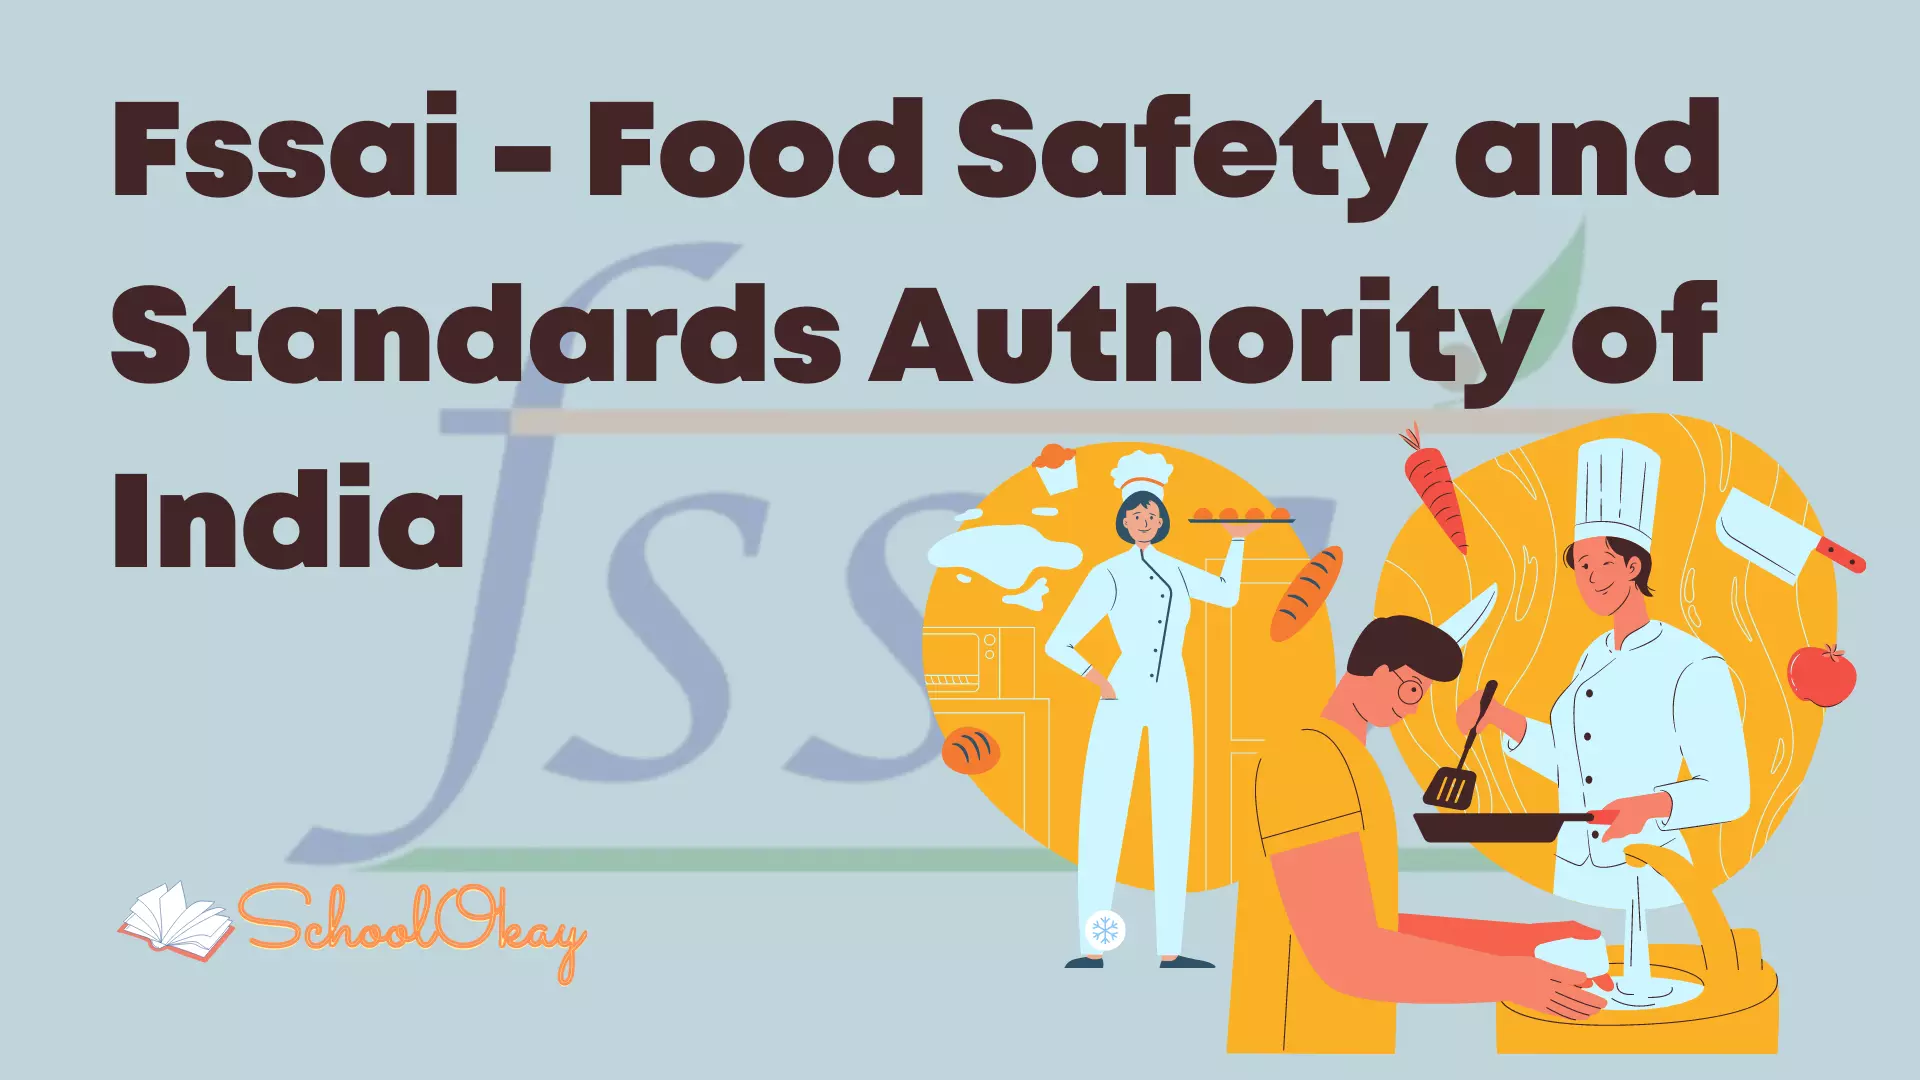 Fssai - Food Safety and Standards Authority of India